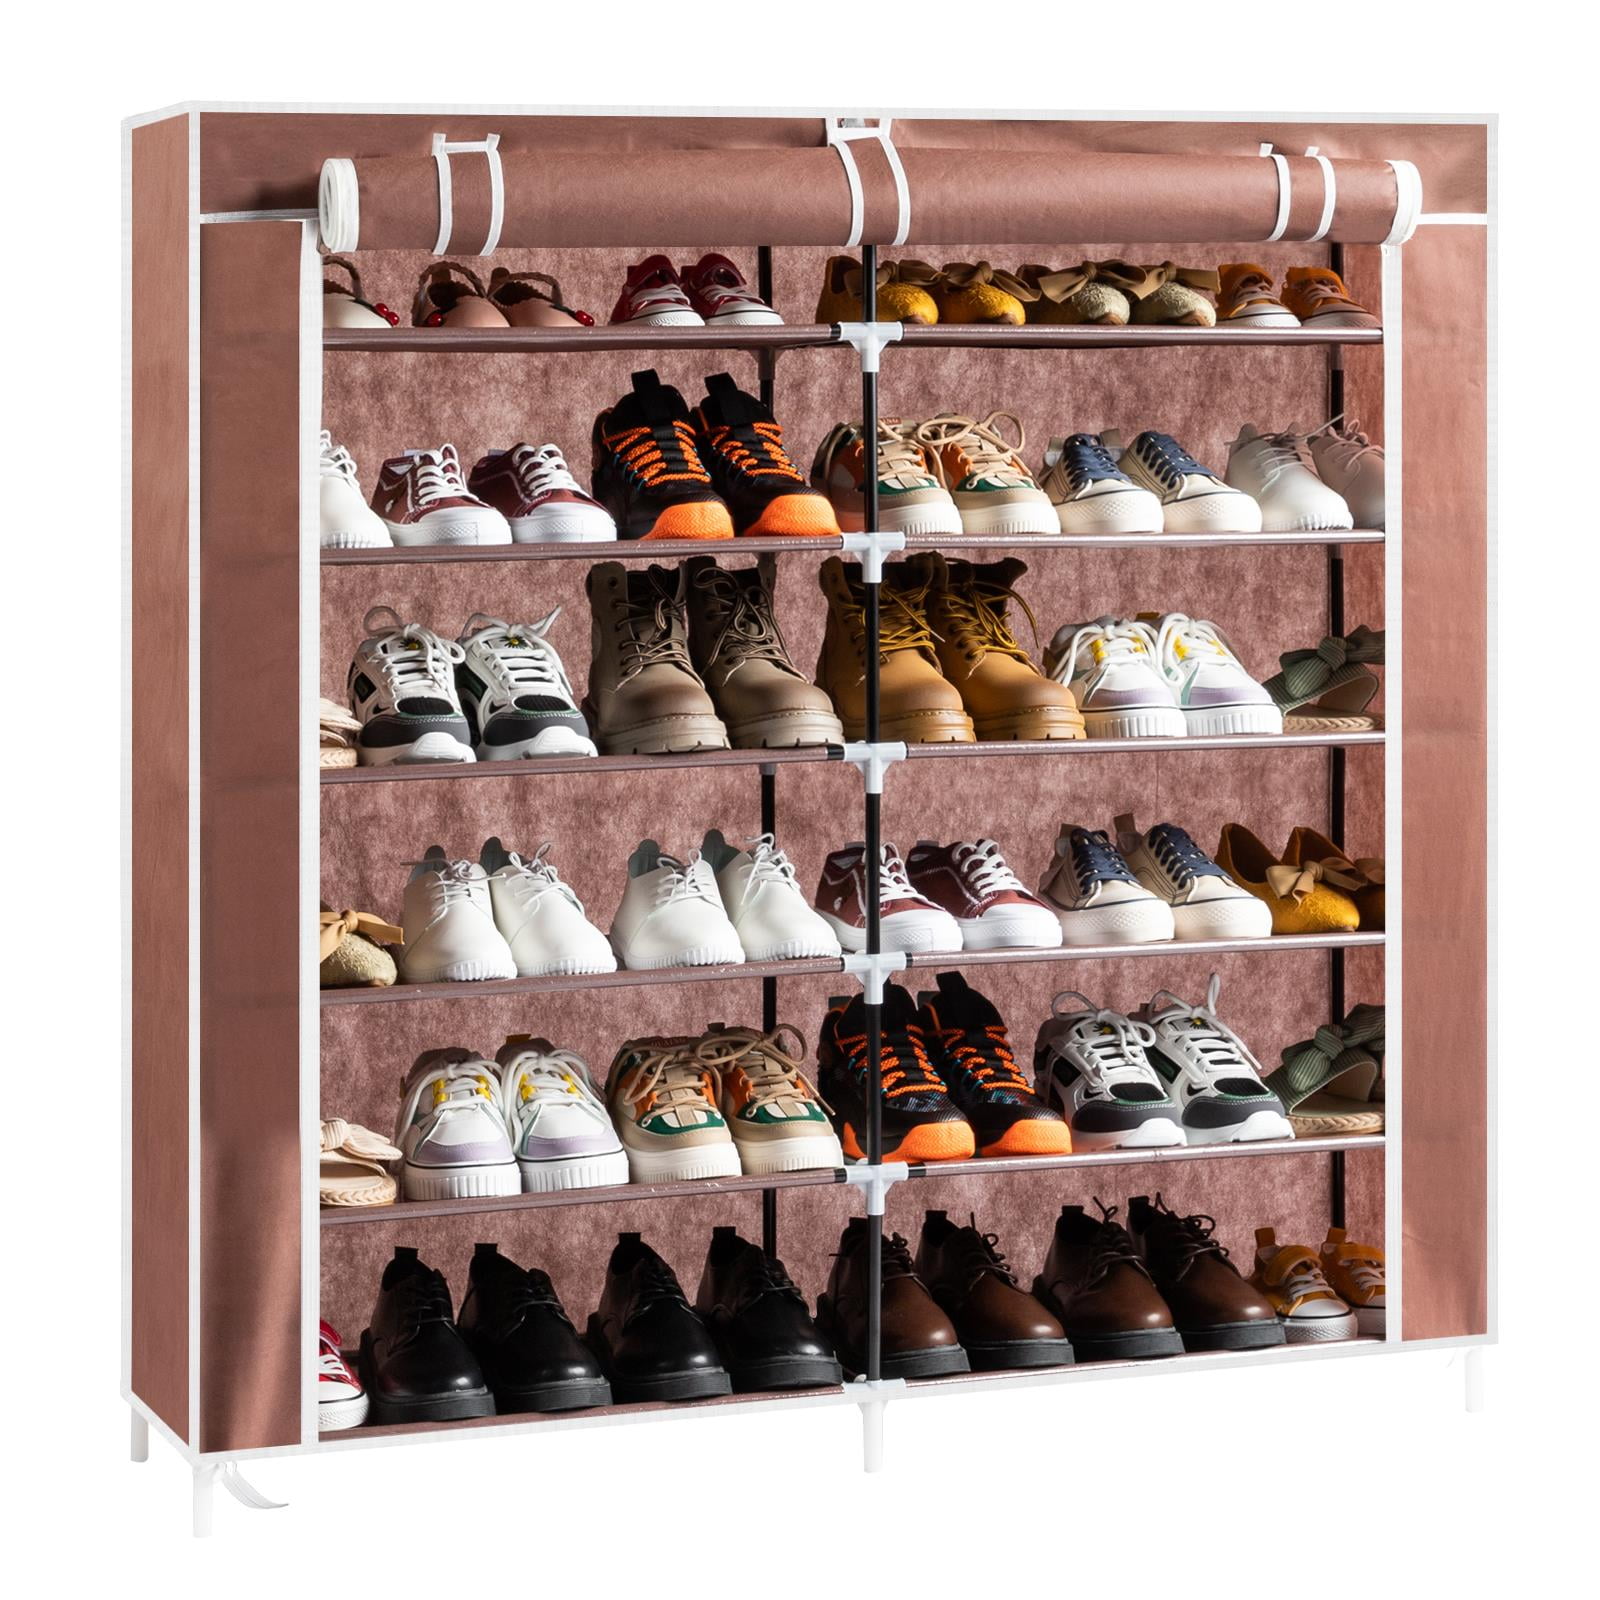 Goplus Brown Wood Shoe Rack Organizer with 6 Tiers - Holds 9 Pairs of  Shoes, Freestanding Design for Closet or Display Shelf